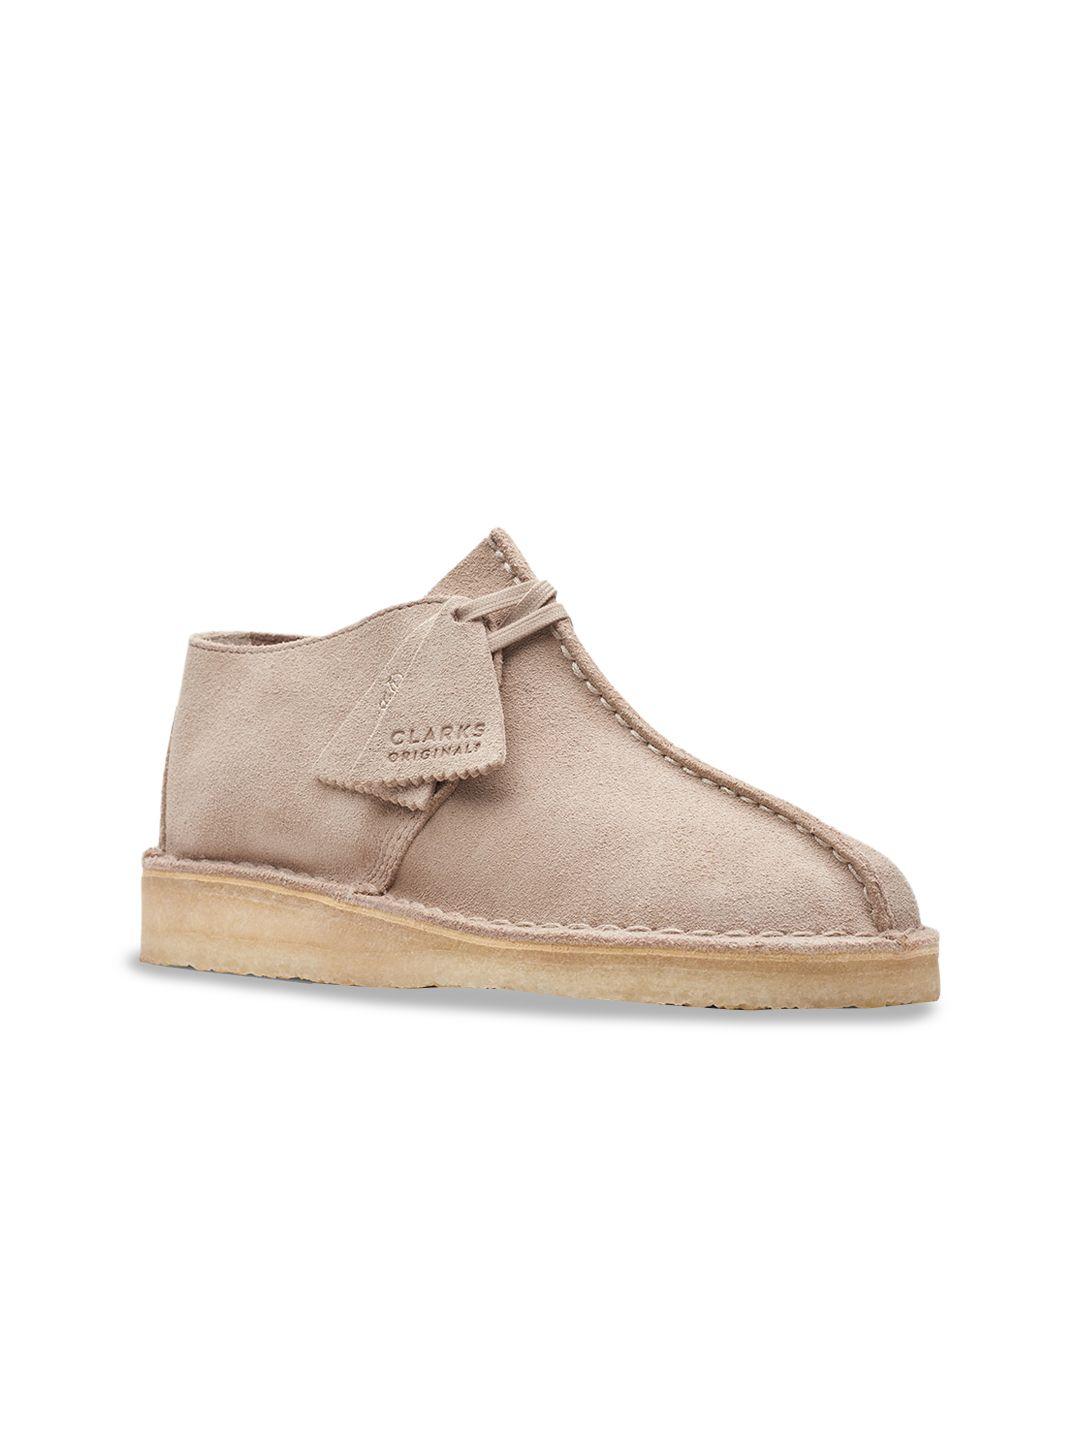 clarks women lace-up suede desert boots